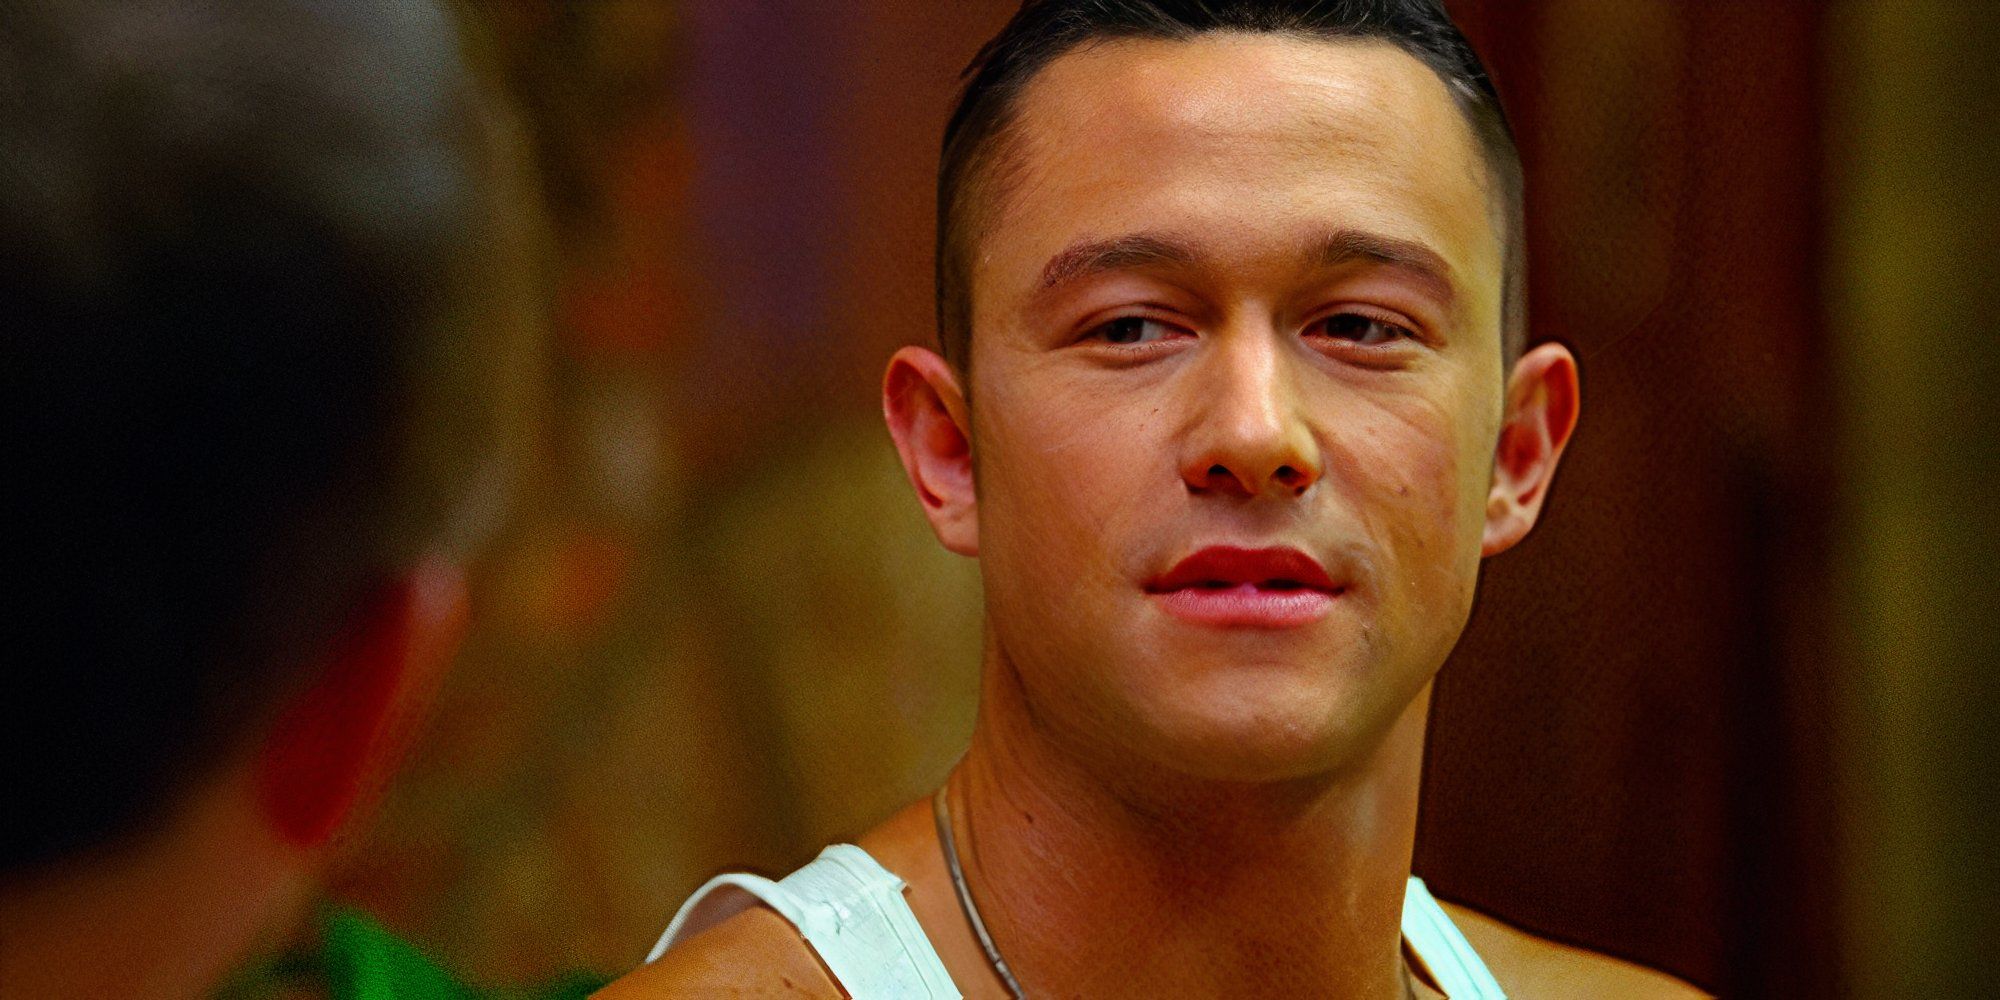 Why 2013 Romantic Comedy Is “More Relevant In The Last Decade” Explained By Joseph Gordon-Levitt